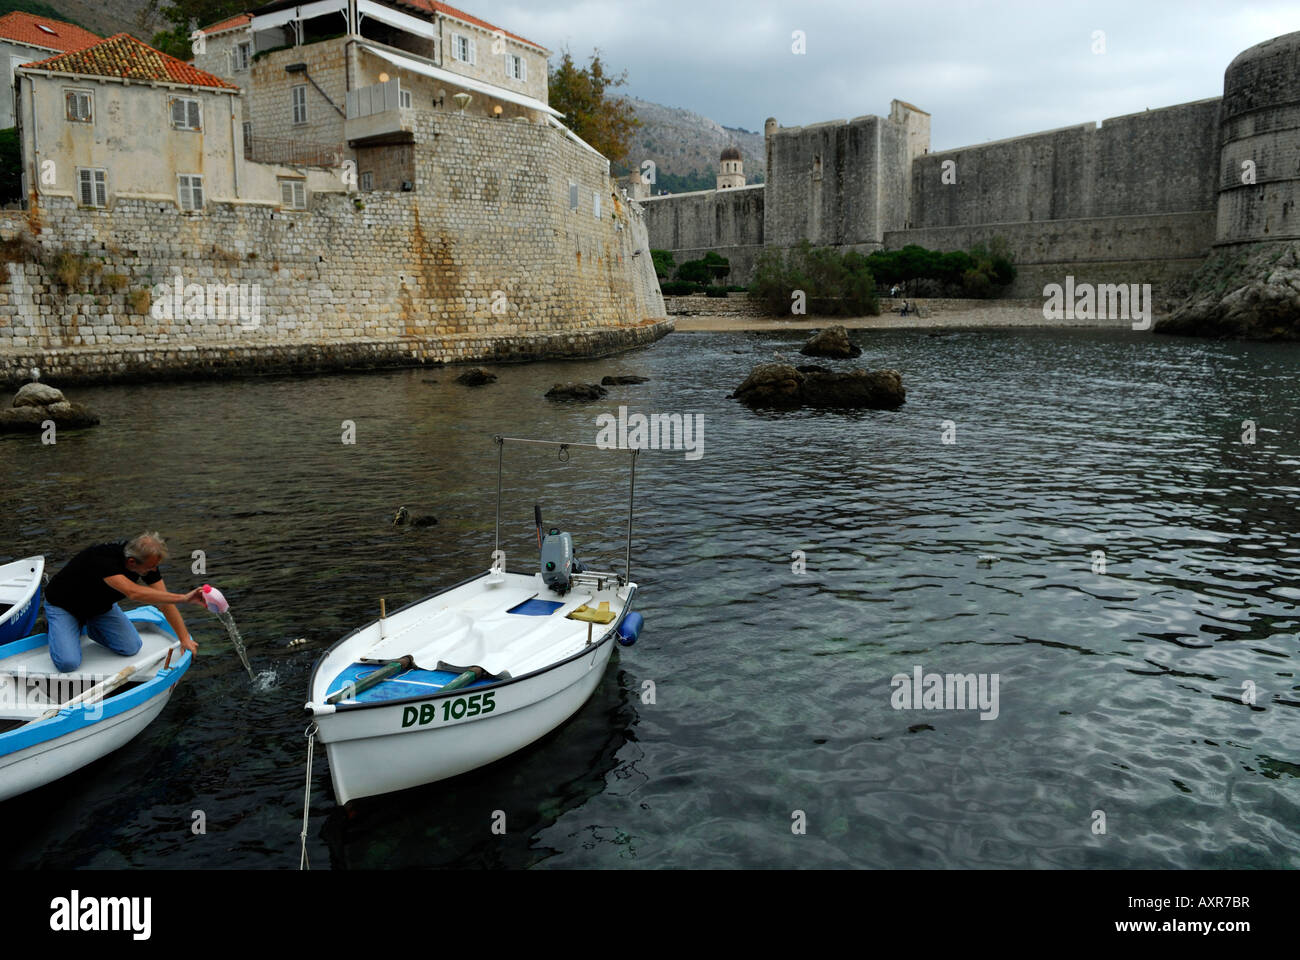 Man emptying water from small boat in Dubrovnik's oldest harbour, Kalarinja. Dubrovnik old town, Croatia Stock Photo